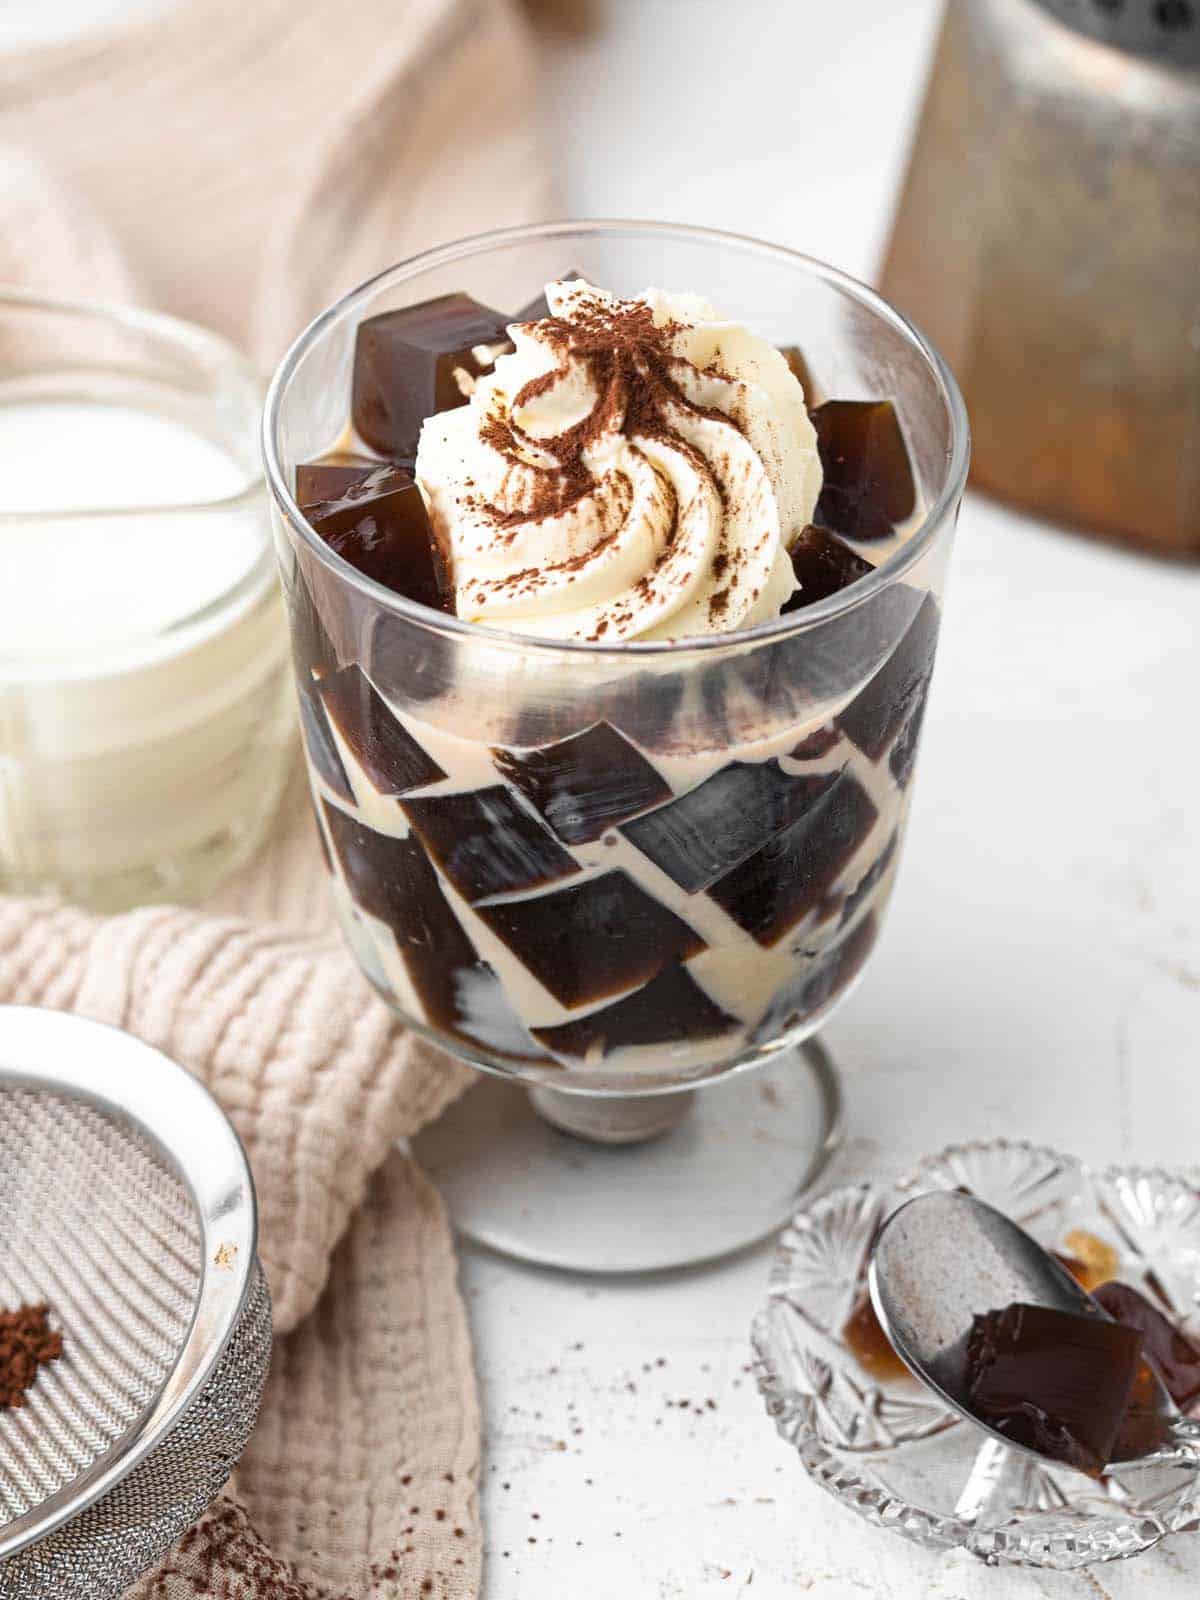 Japanese kohii coffee jelly with condensed milk and whipped cream